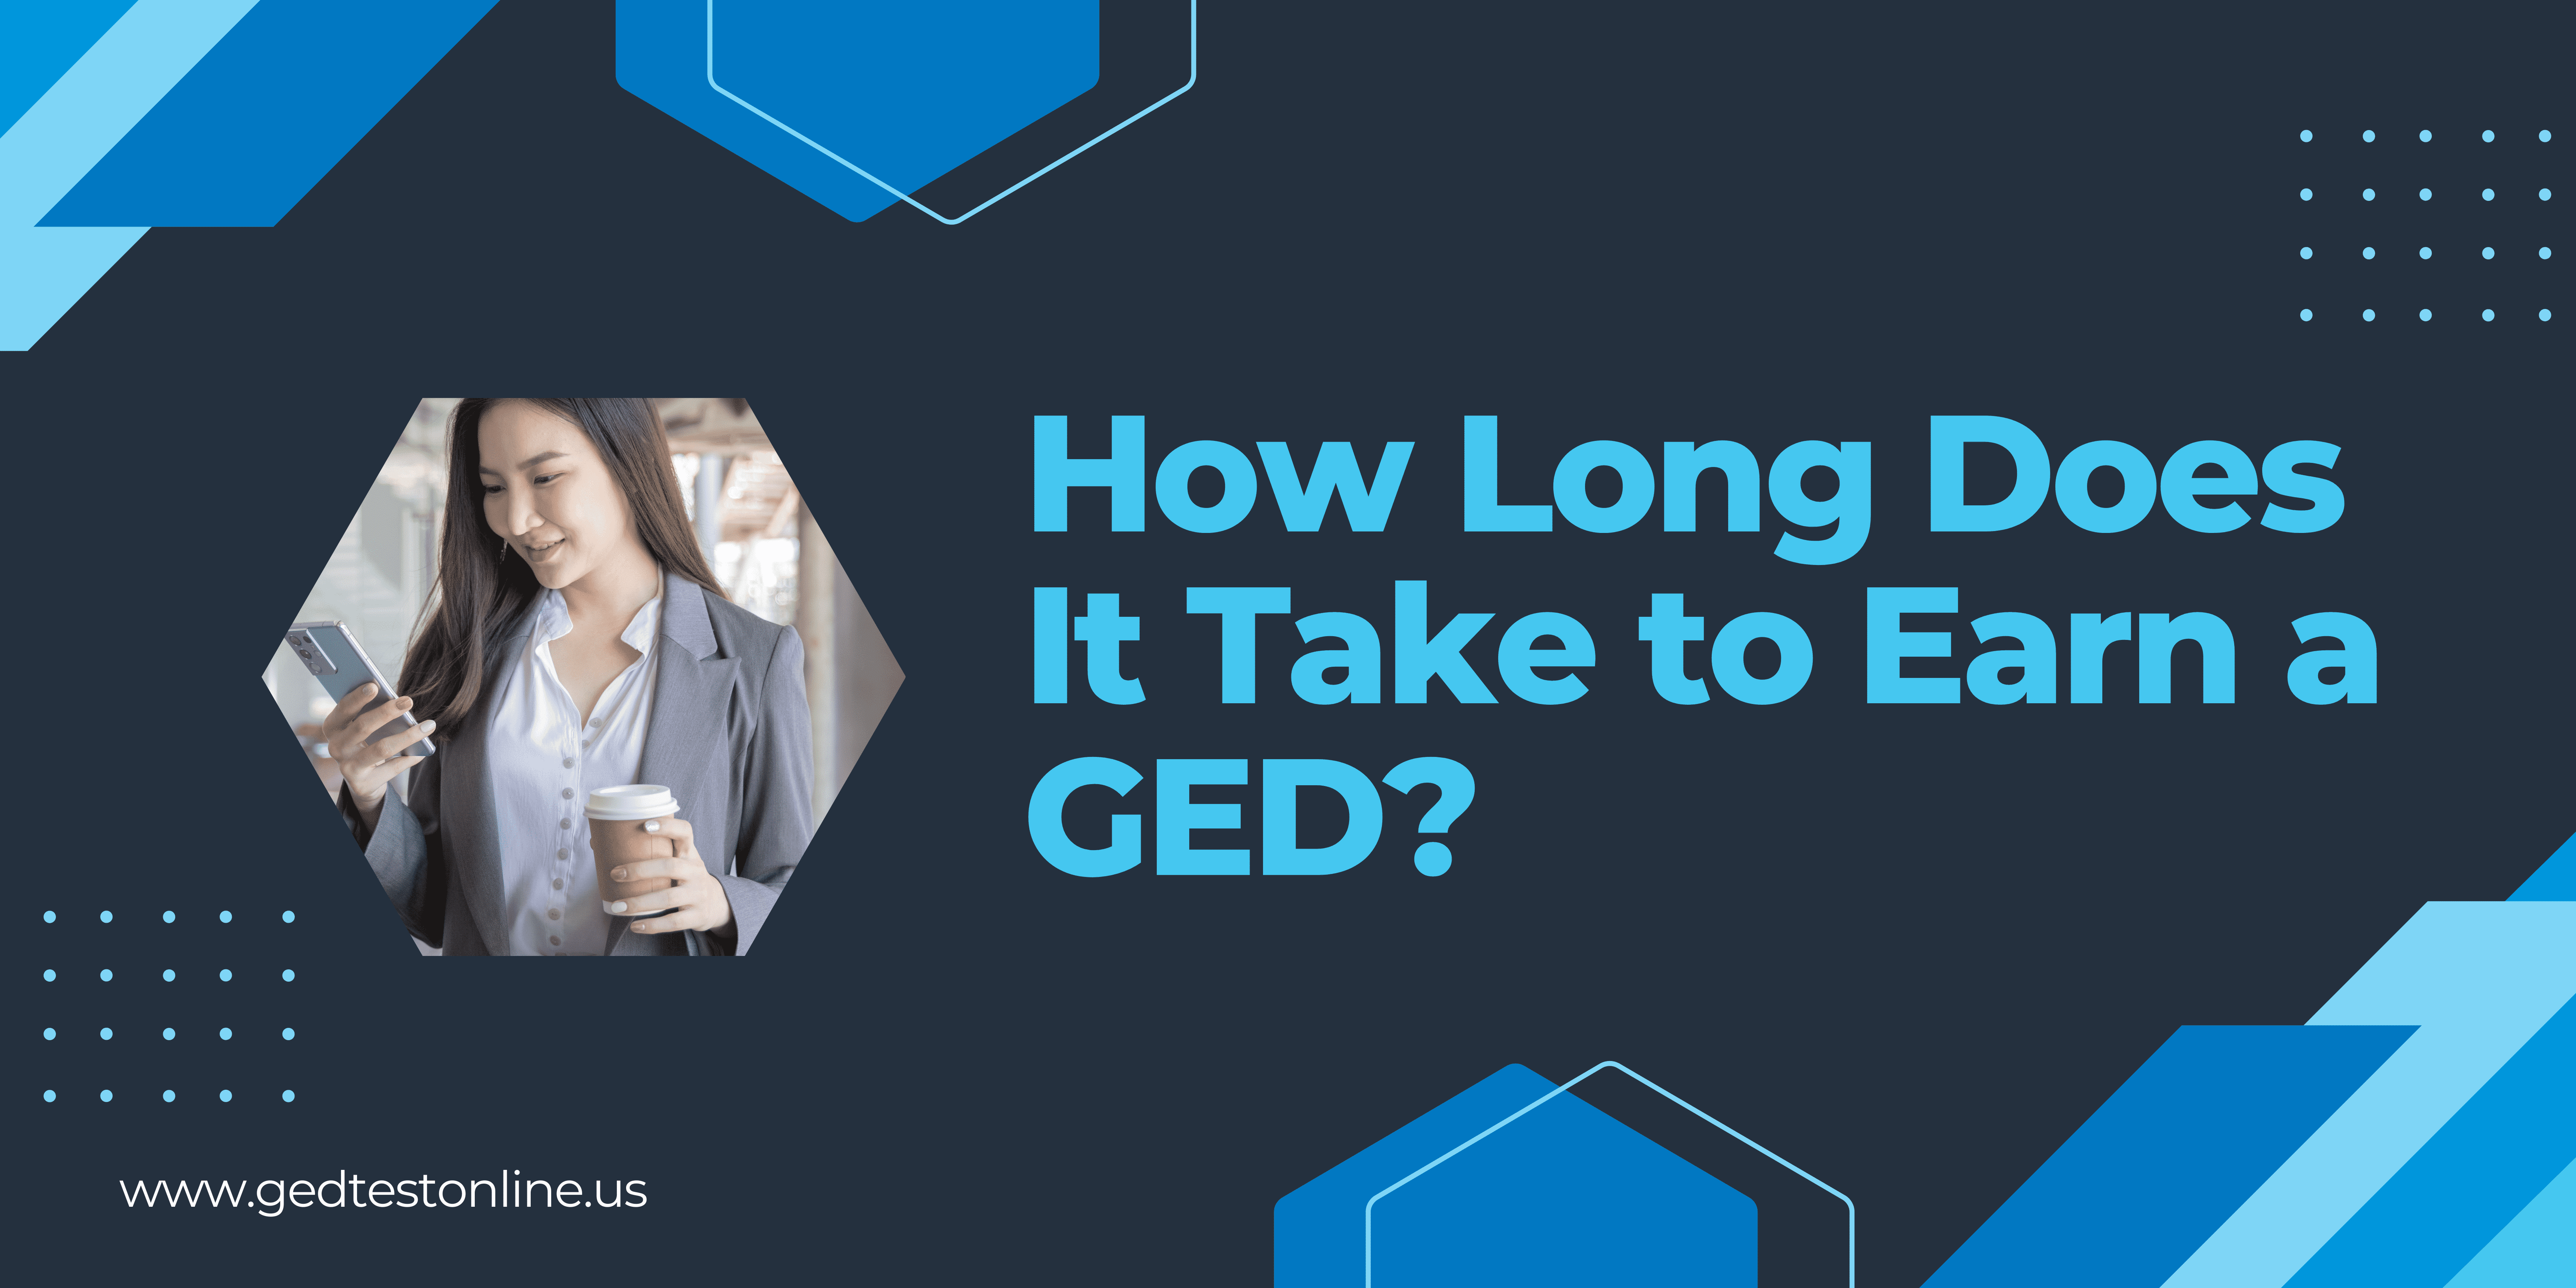 Timeline of Earning a GED: How Long Does It Take to Earn a GED? 